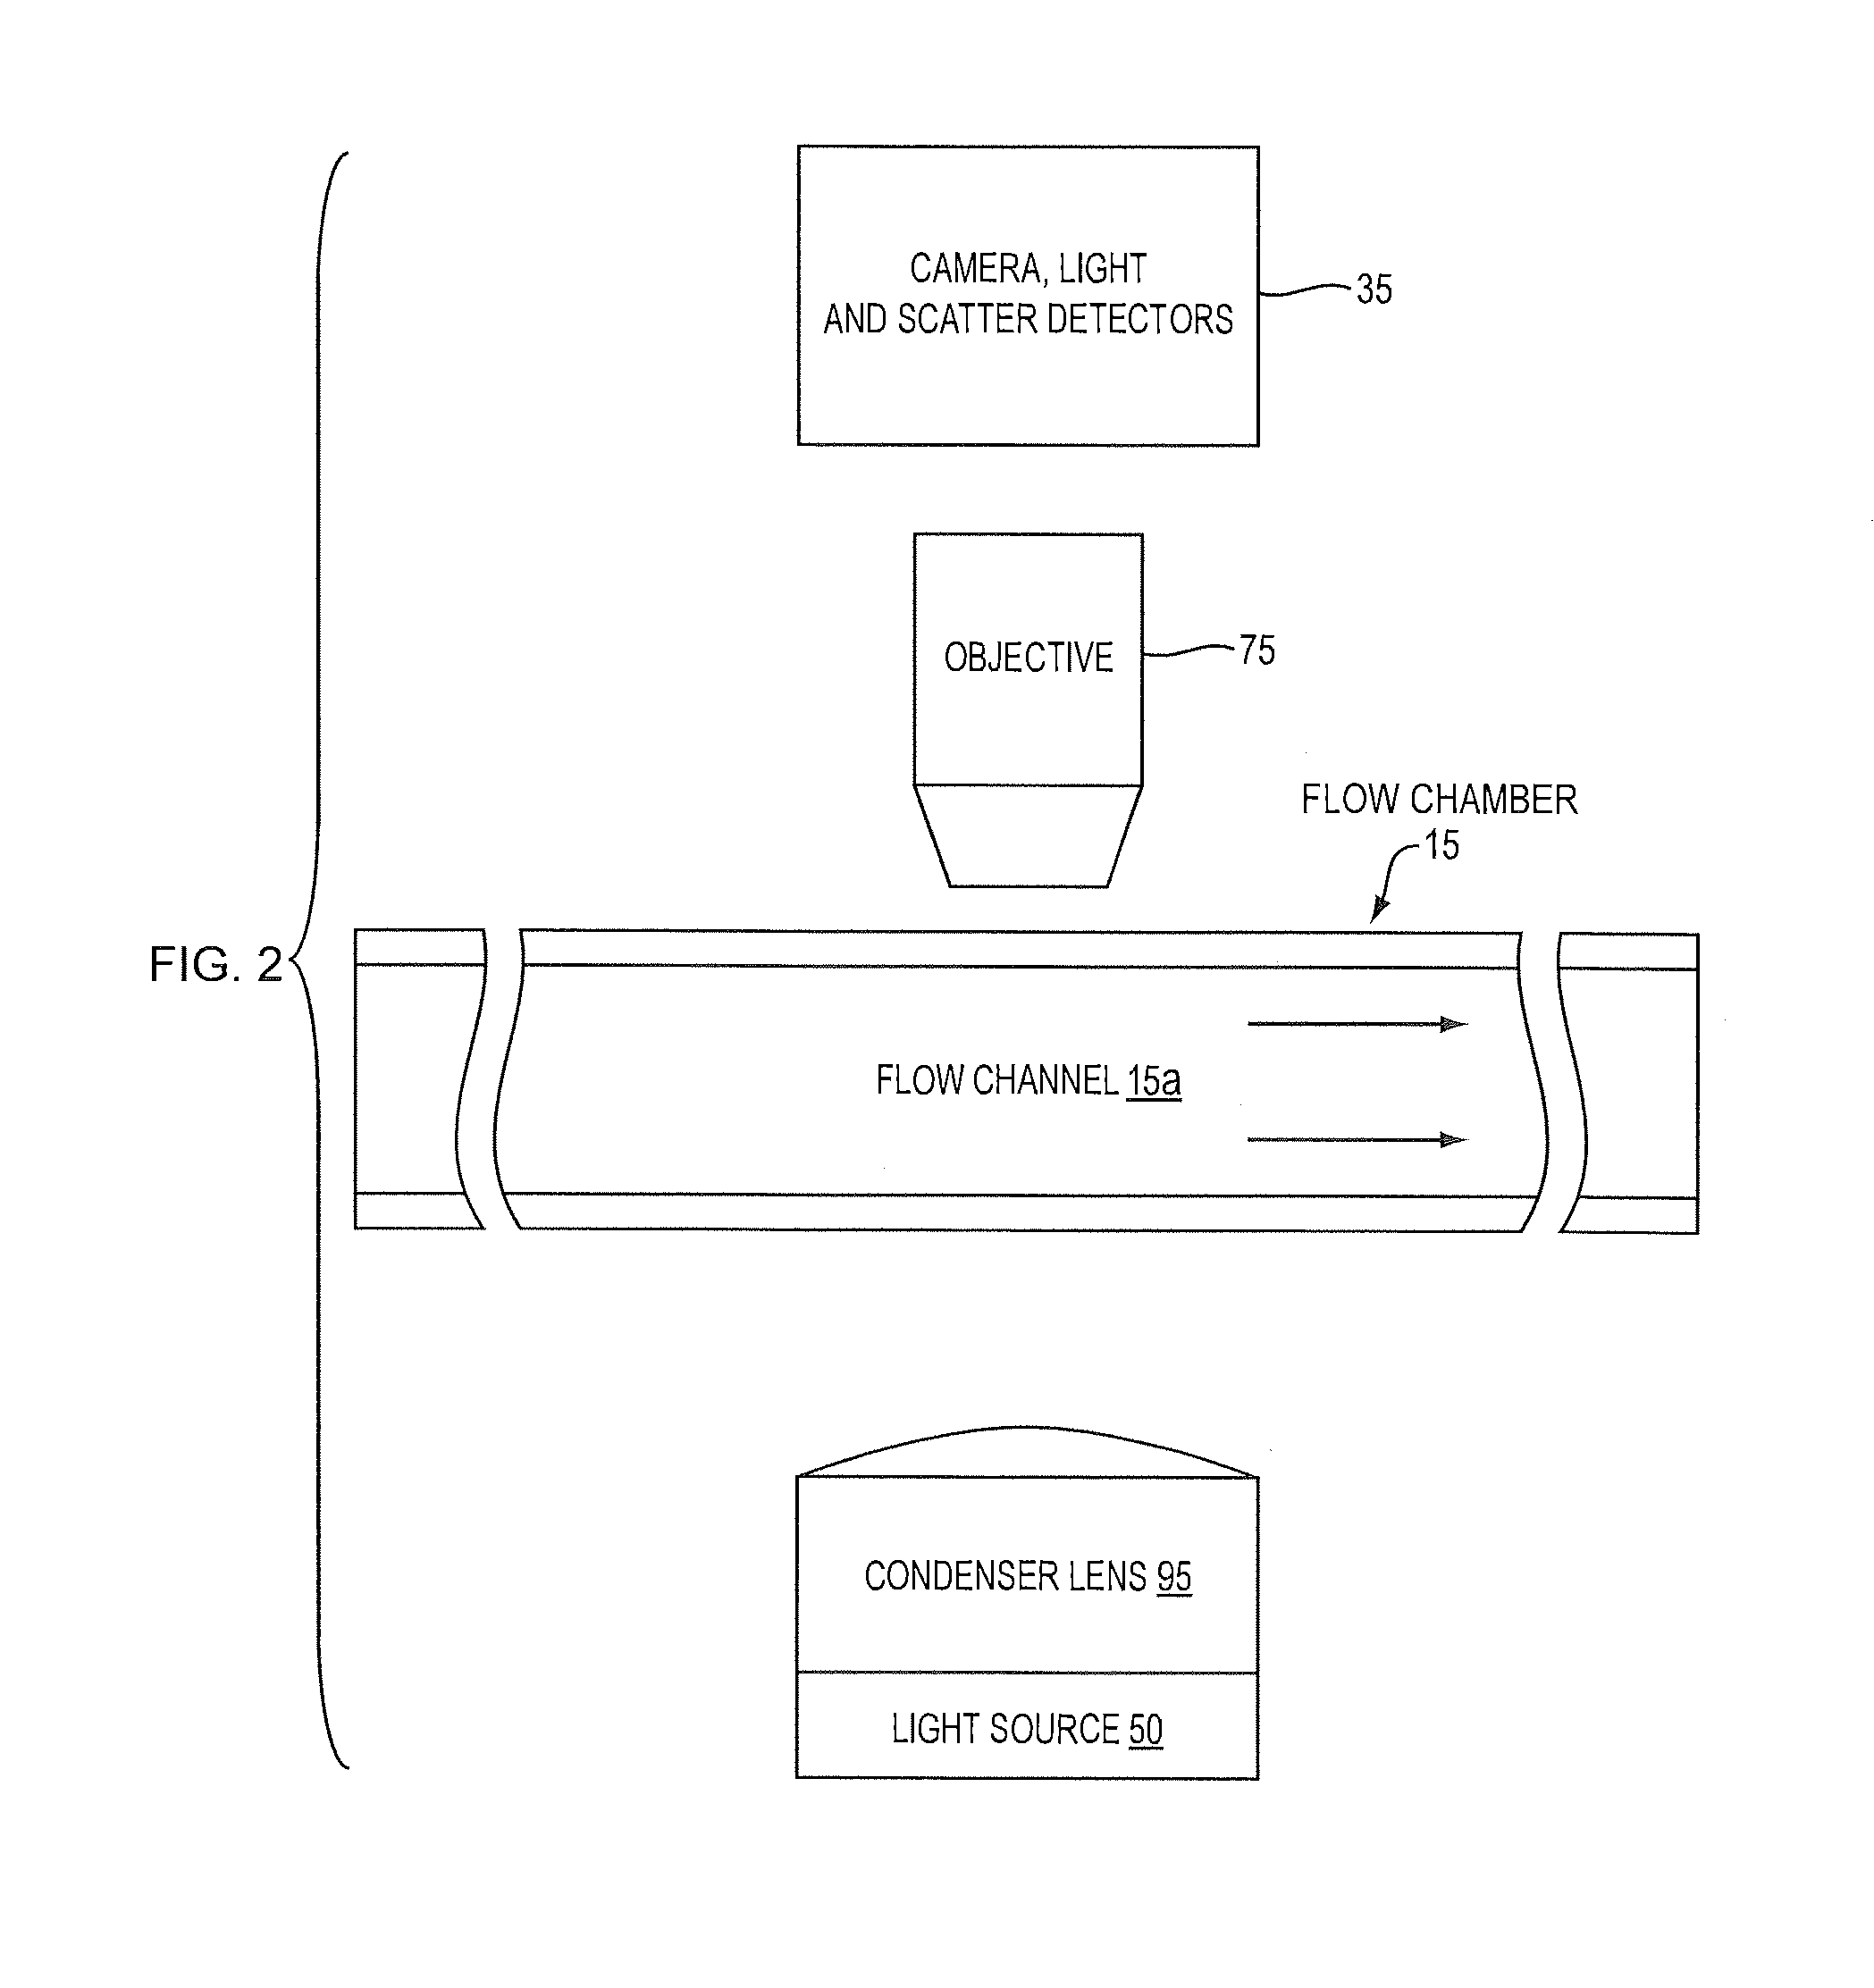 Method of treatment analysis with particle imaging